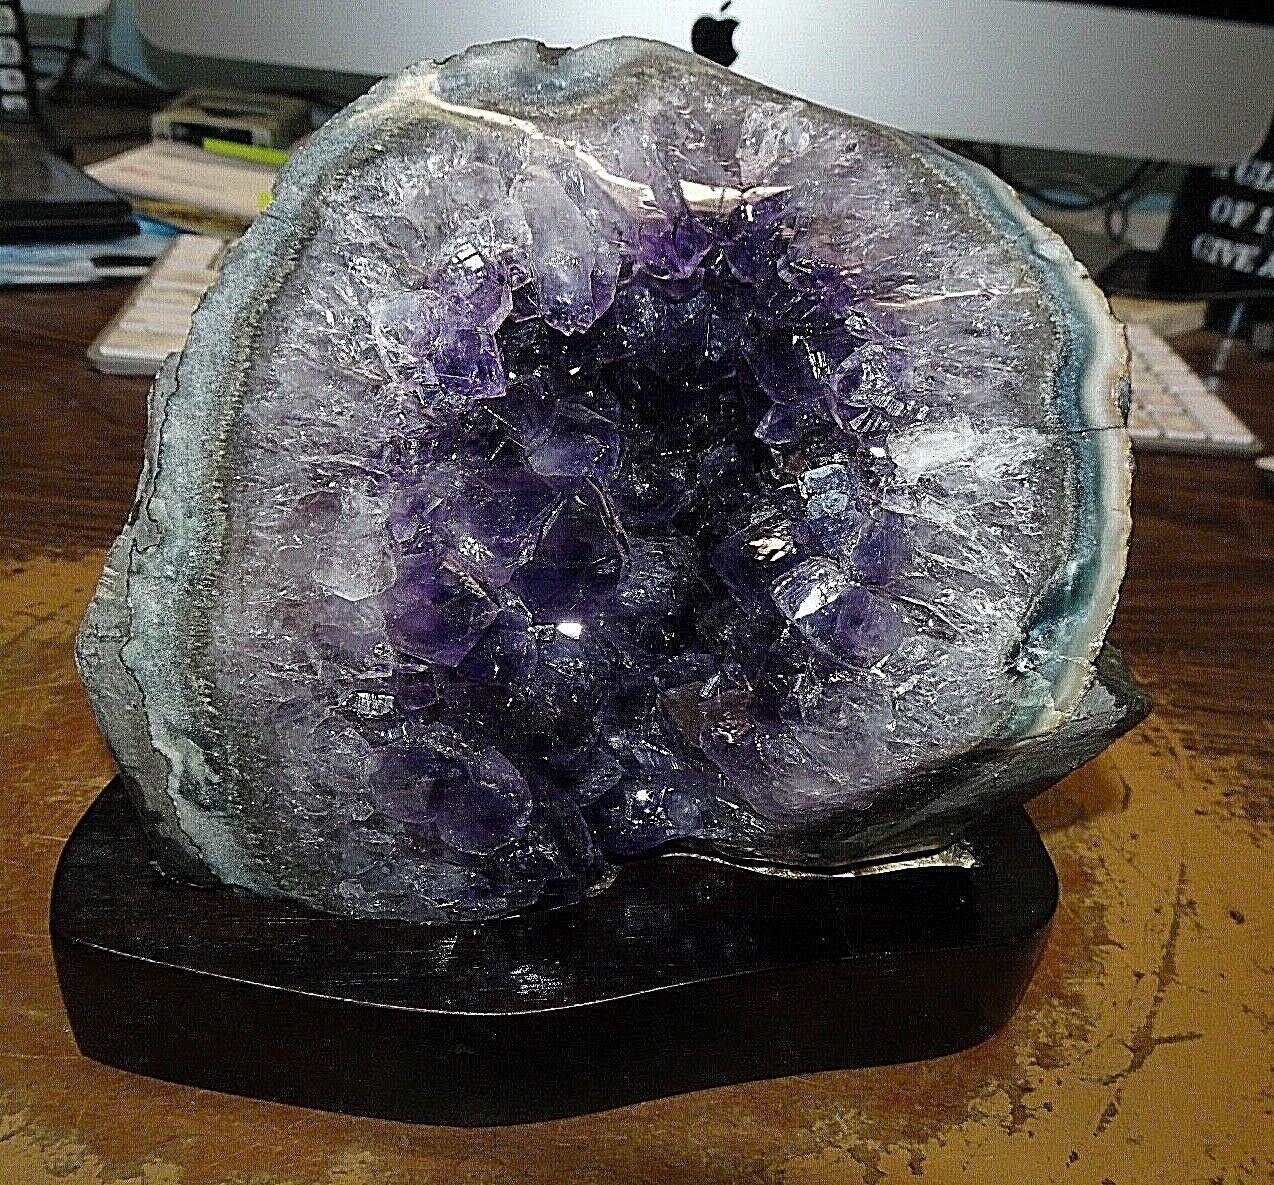 LG. POLISHED URUGUAY AMETHYST  CRYSTAL  CLUSTER CATHEDRAL GEODE  STAND AGATE RIM